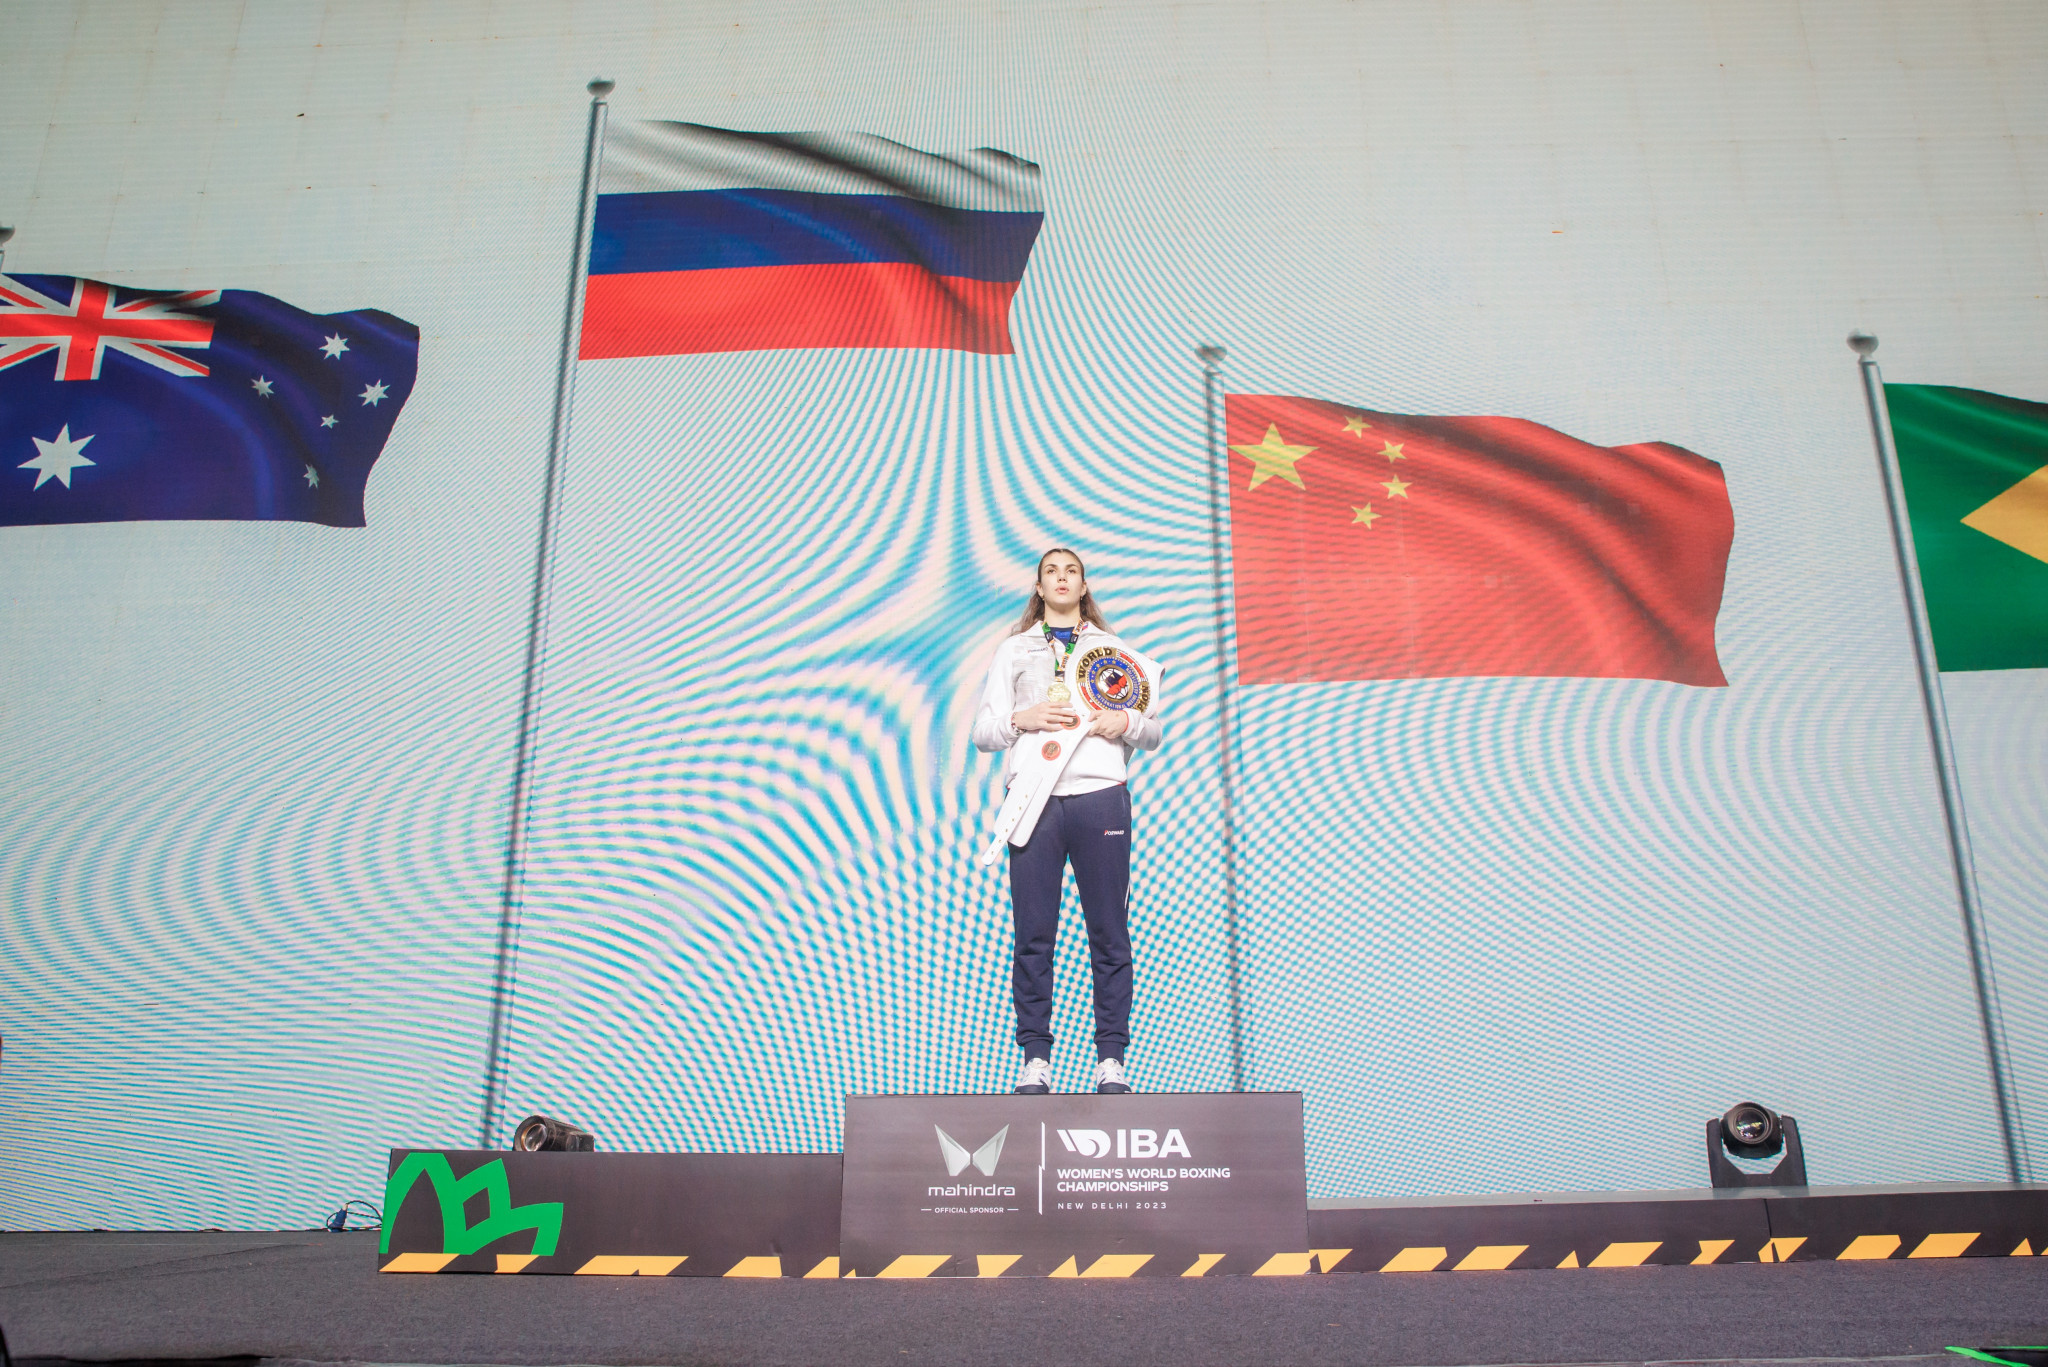 Anastasiia Demurchian of Russia stood alone on the podium as organisers played the correct anthem following their mistake ©IBA